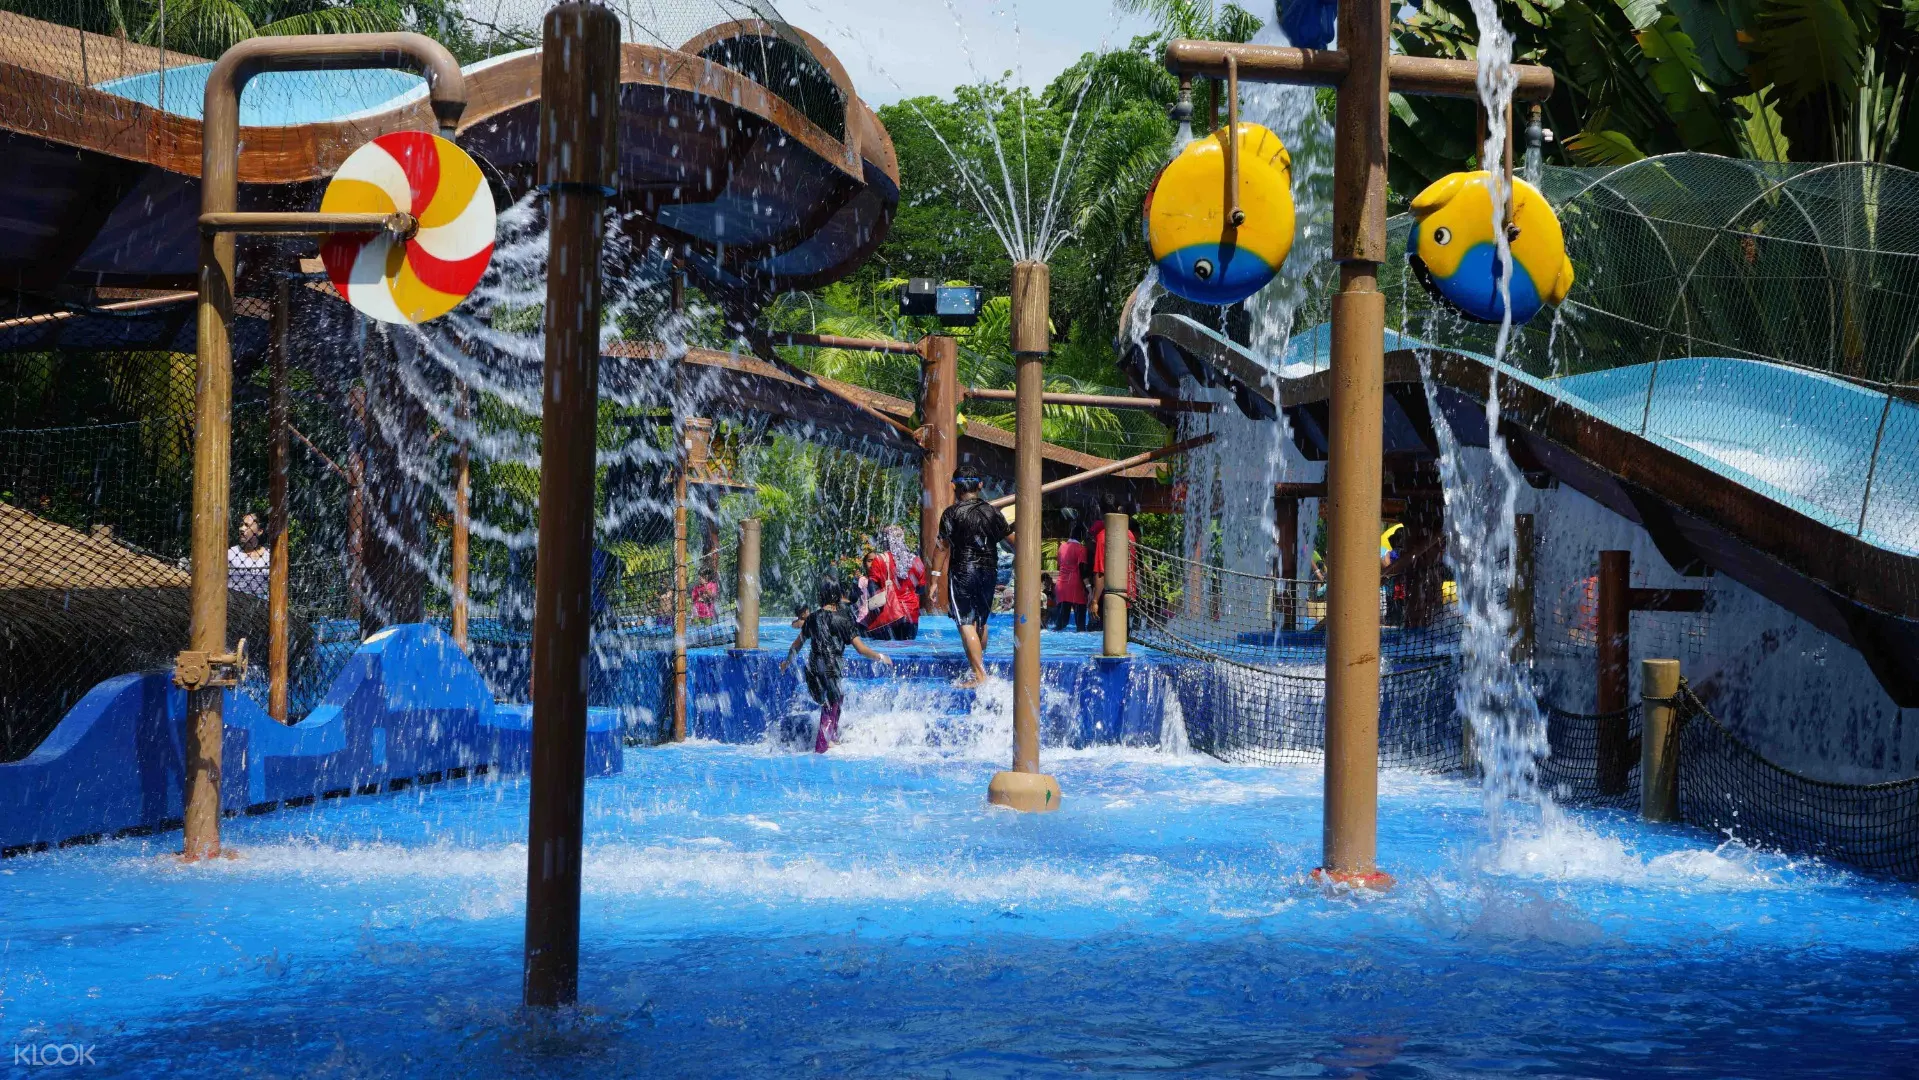 Wet World Water Park At Shah Alam Klook Malaysia